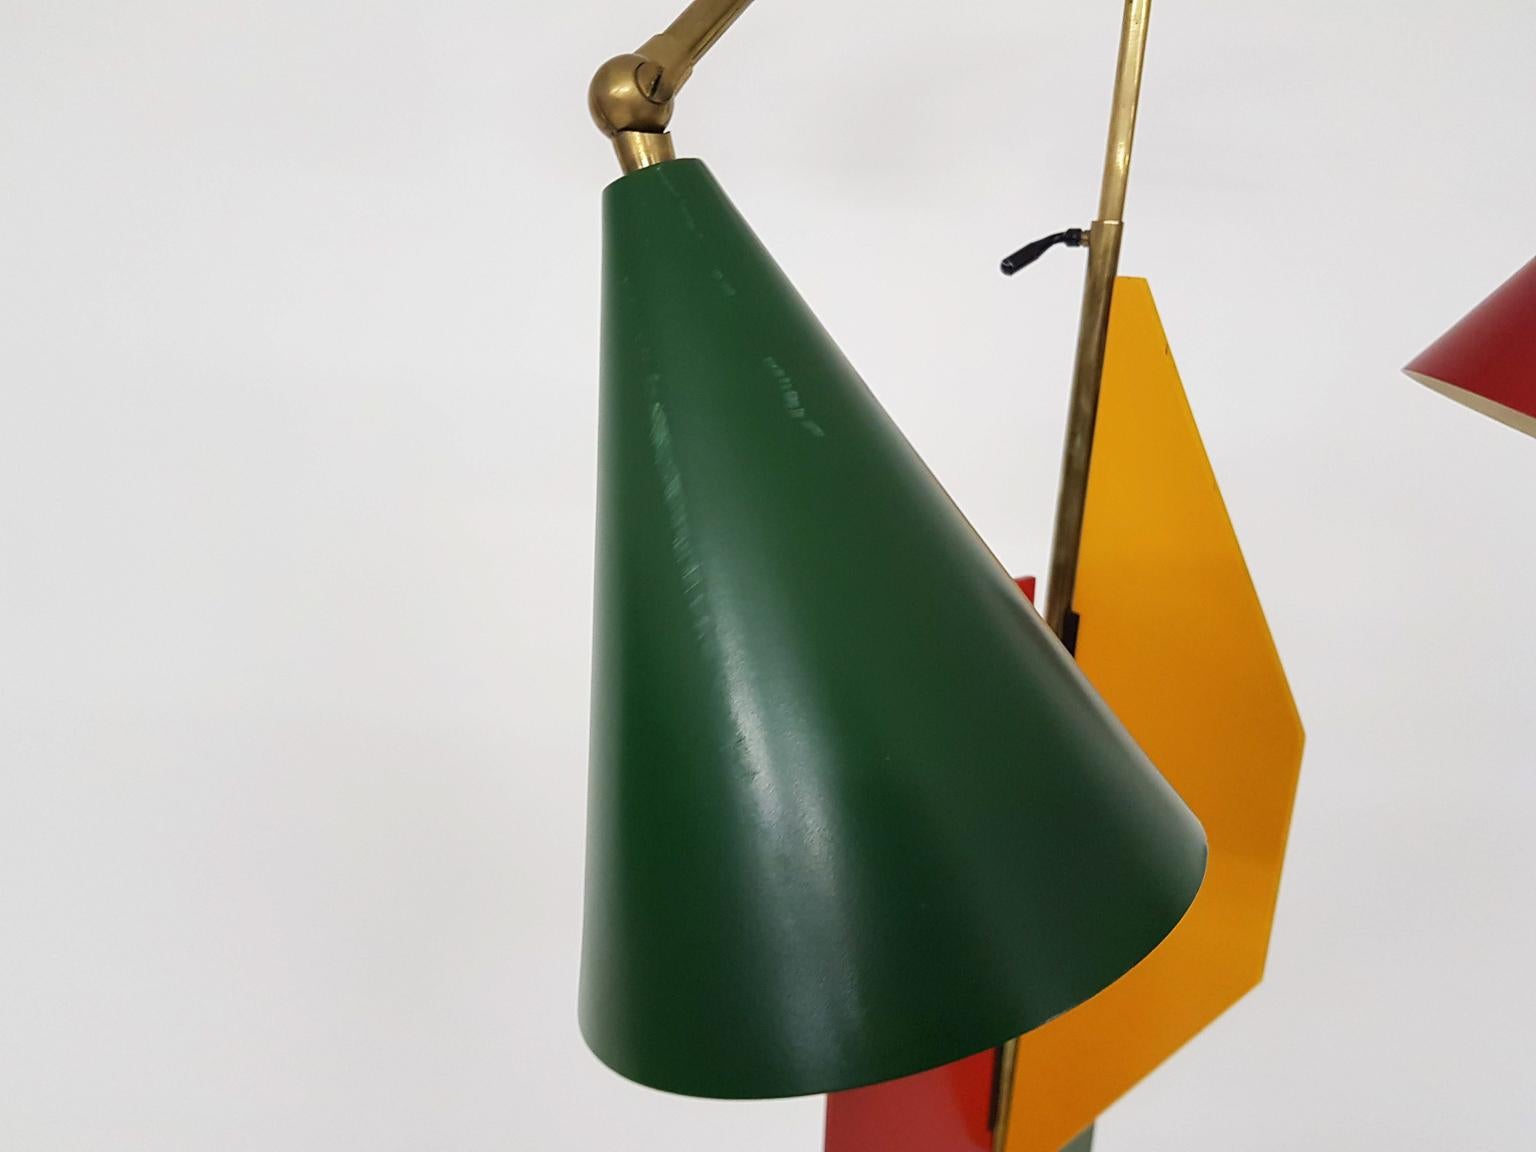 Exceptional Colorful Italian Midcentury Floor Light Attributed to Arredoluce For Sale 11